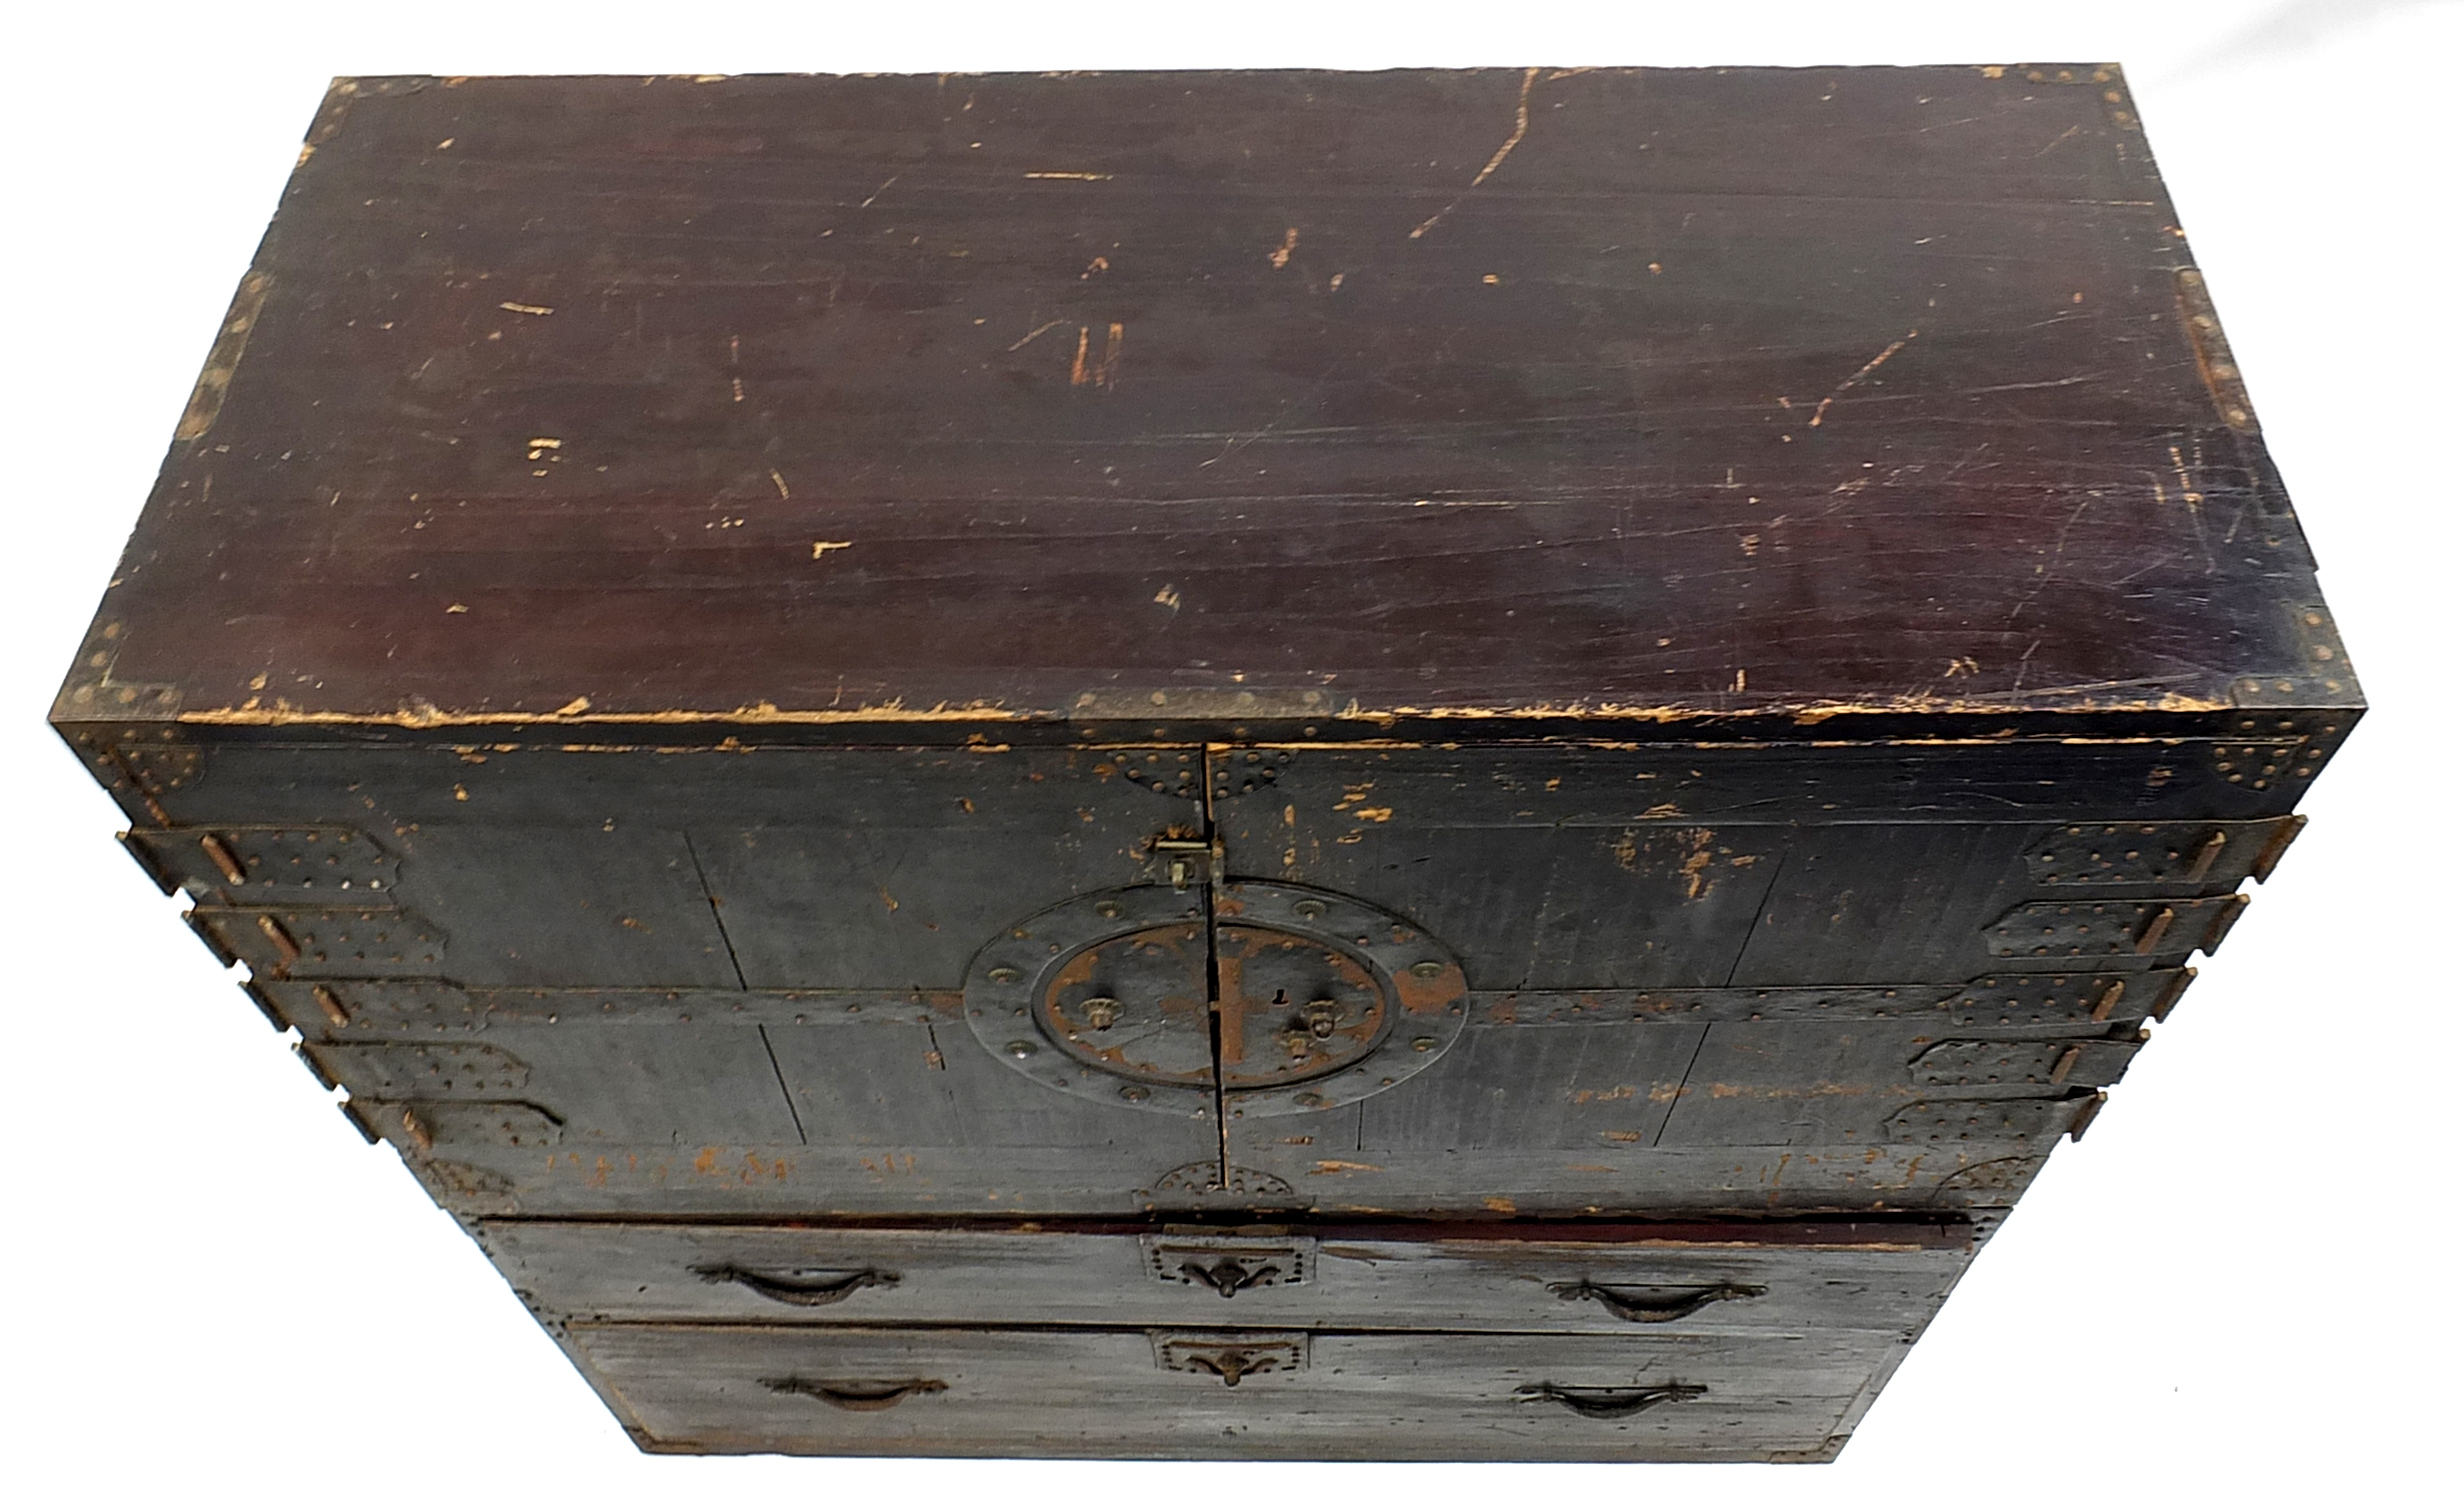 19th century Japanese iron bound two section tansu chest, 93.5cm H x 91cm W x 41.5cm D - Image 2 of 4